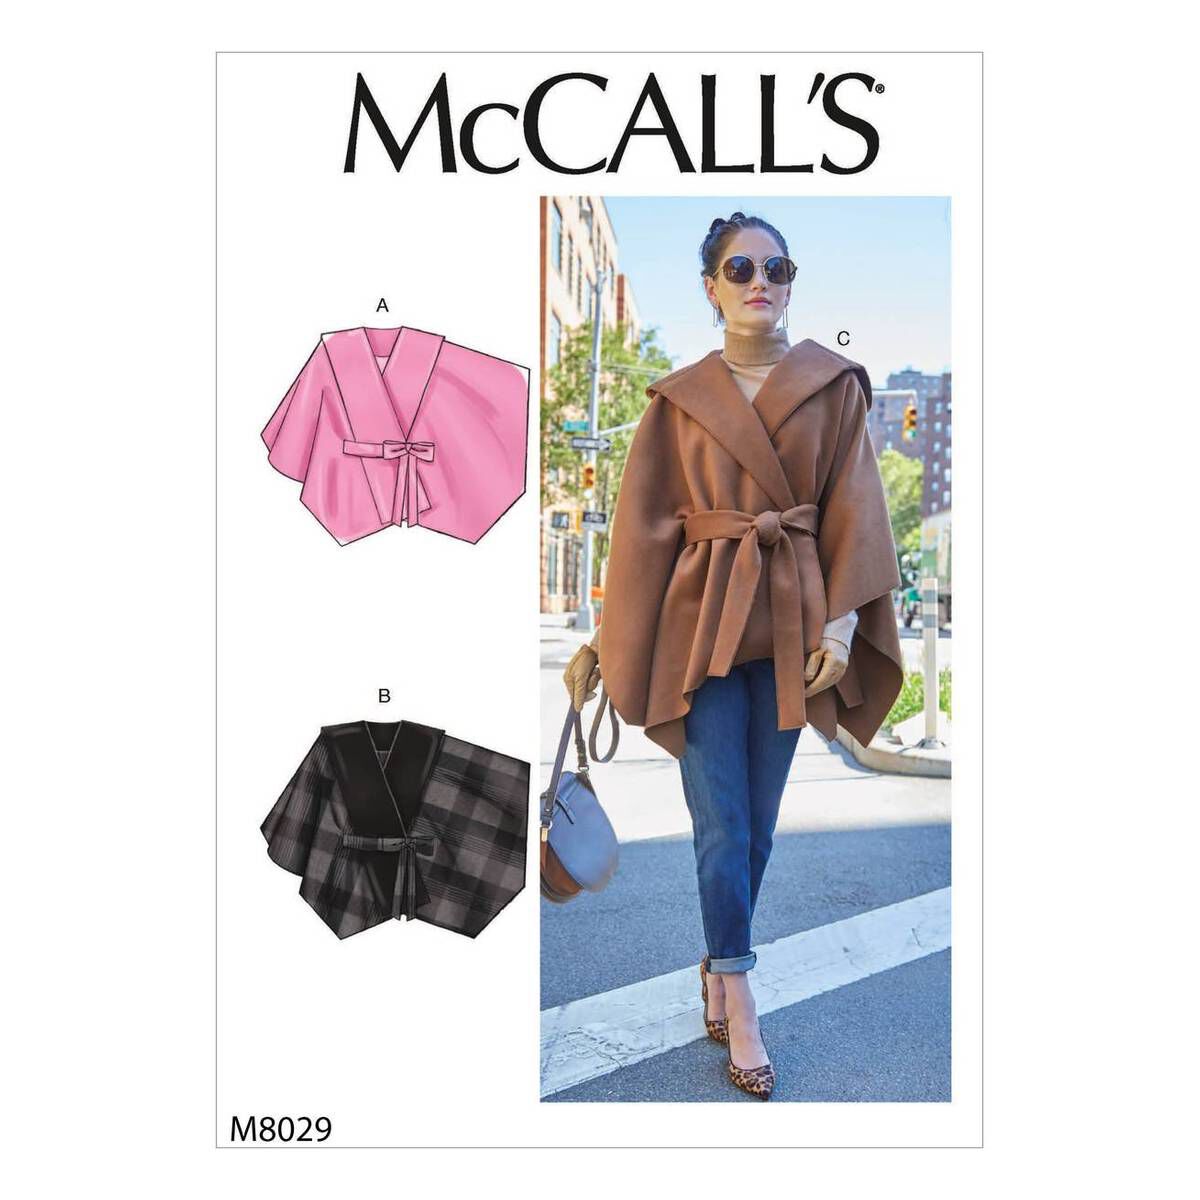 McCall’s Women’s Capes and Belt Sewing Pattern M8029 (XS-M) | Hobbycraft